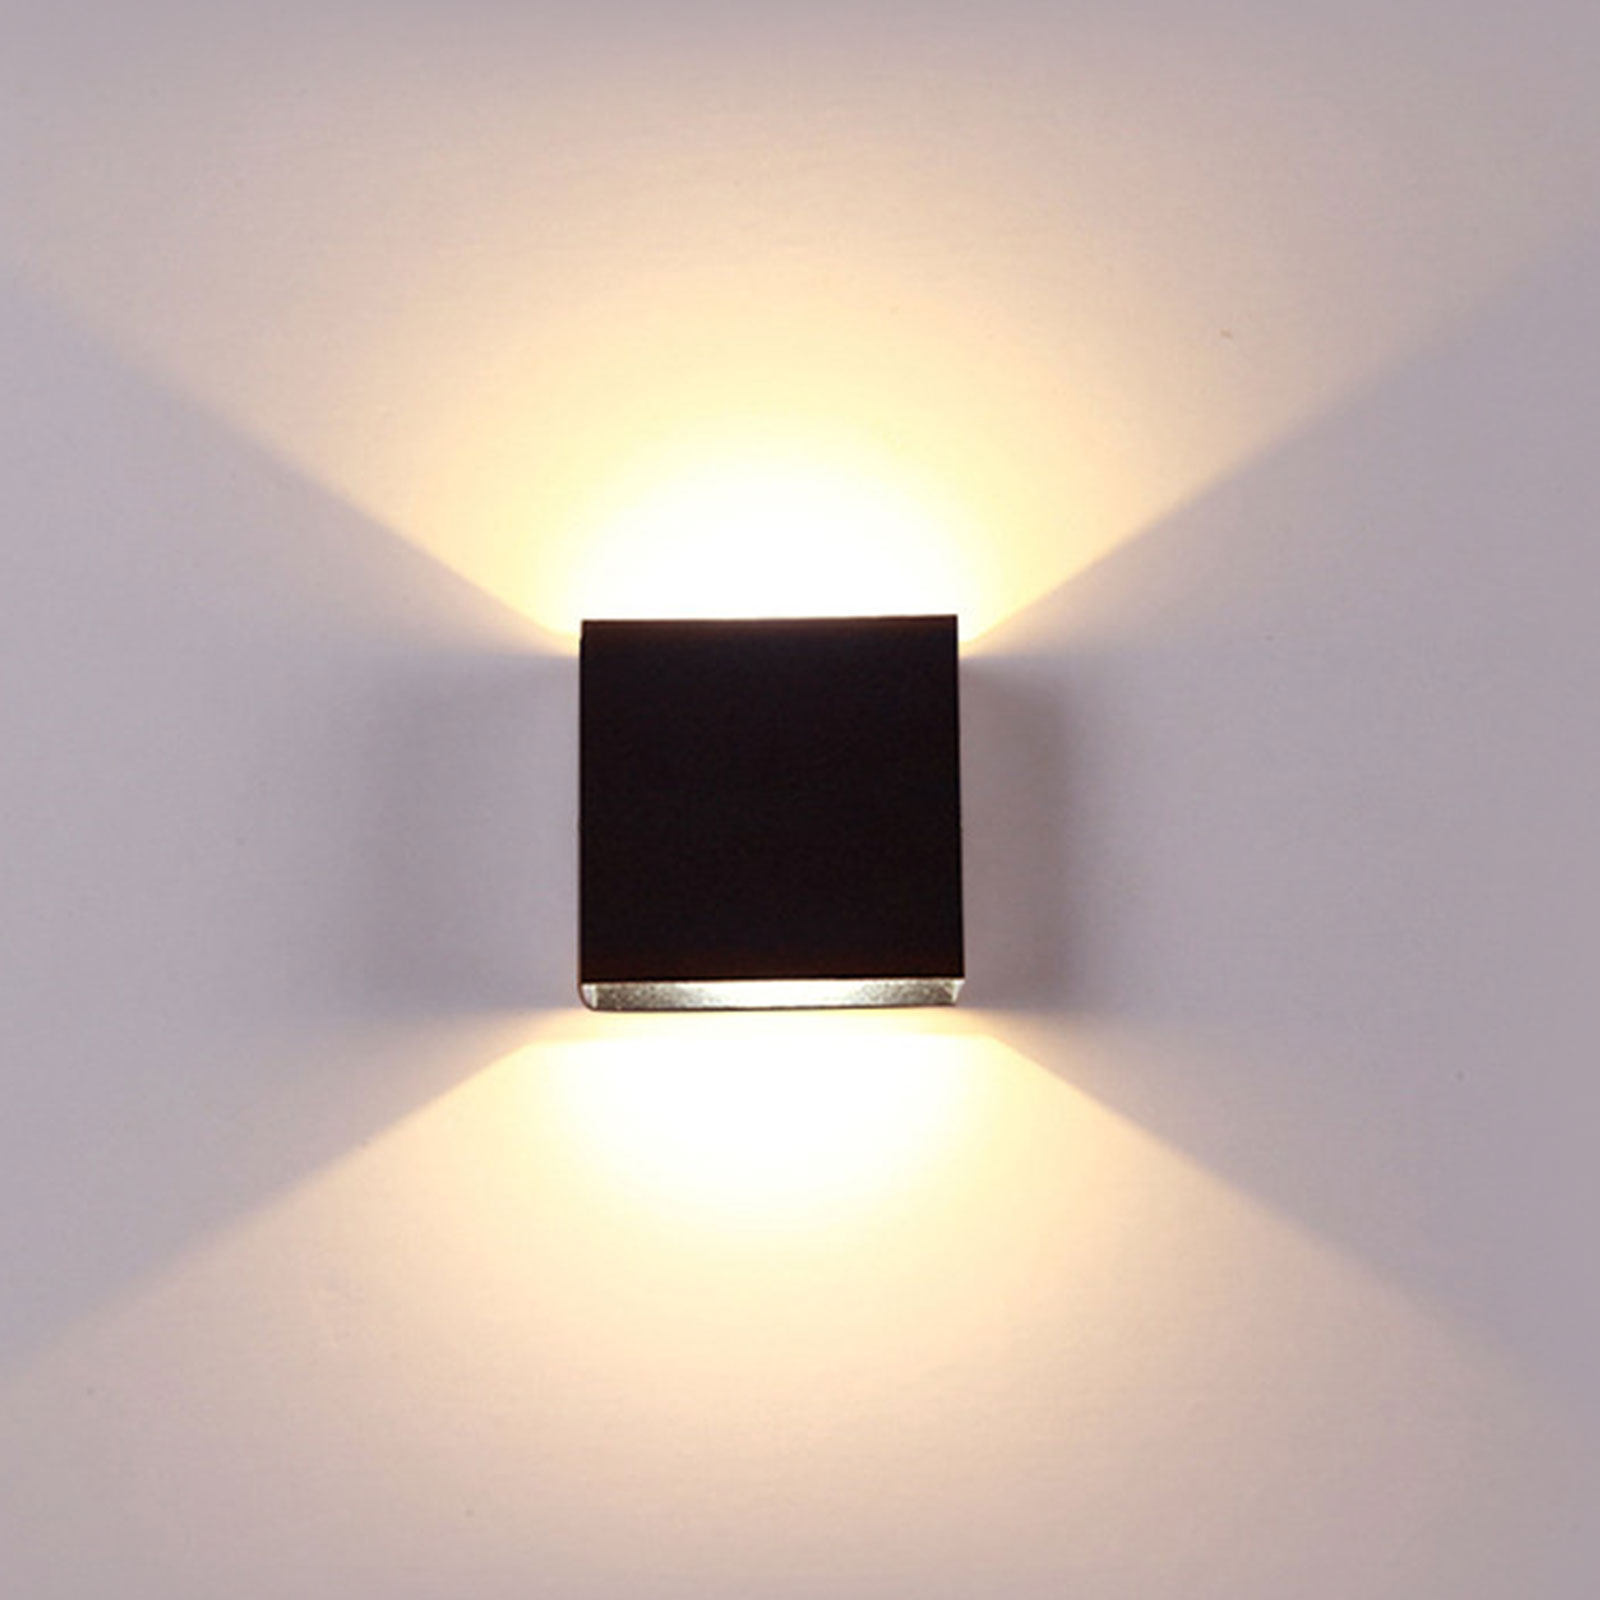 Details about   6W Modern Cube COB LED Wall Up/Down Light Indoor Sconce Lamp Fixture Warm Cool 